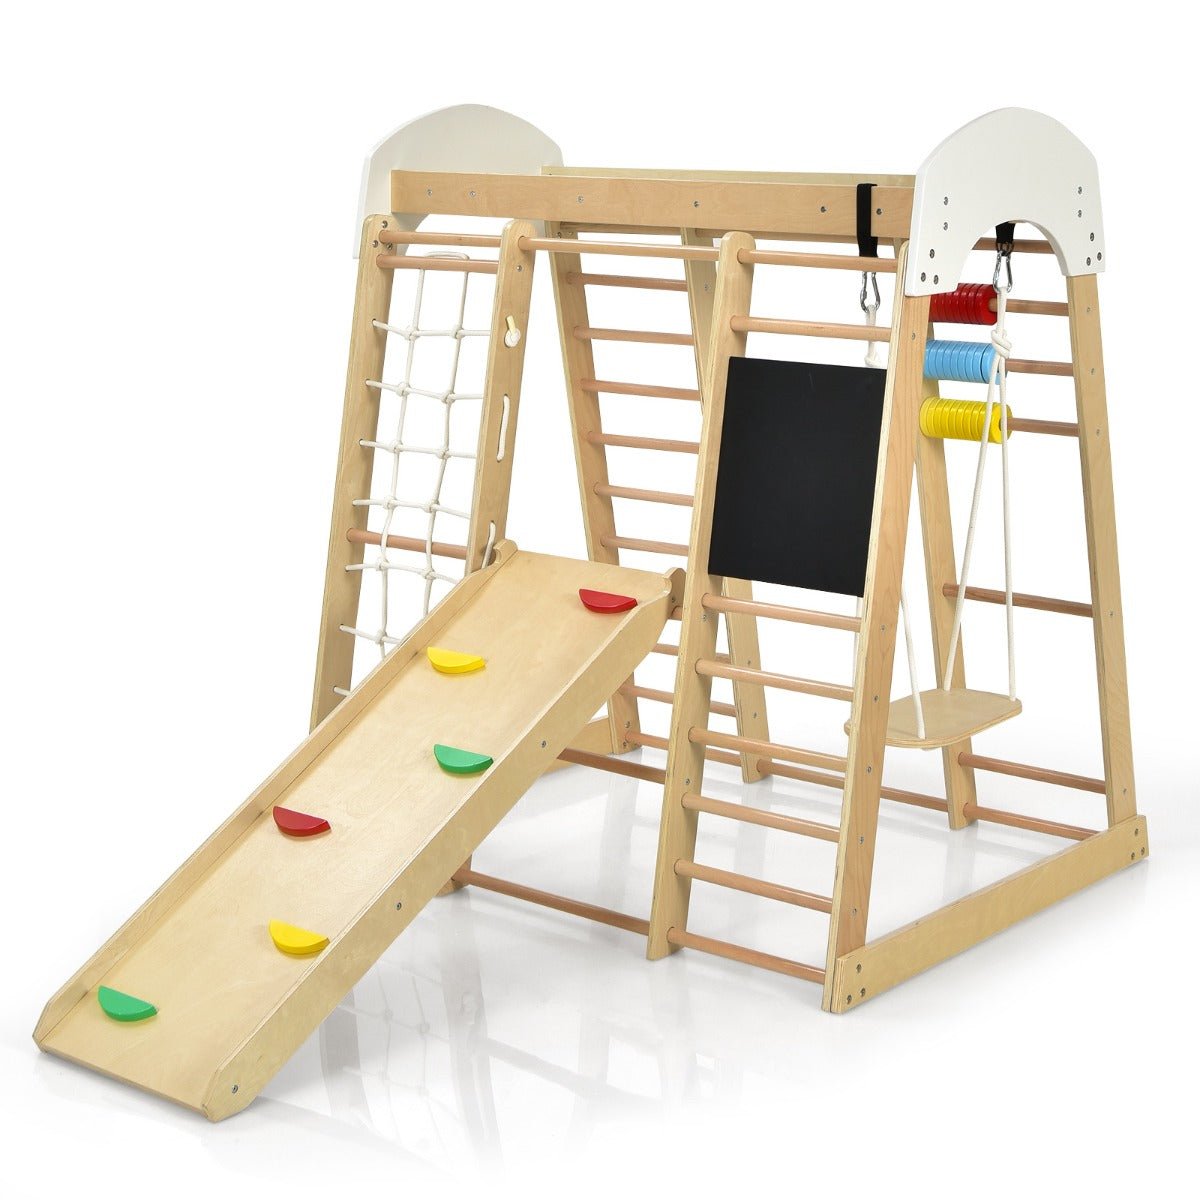 Creative Adventure: Wooden Climbing Playset with Slide and 8-in-1 Features